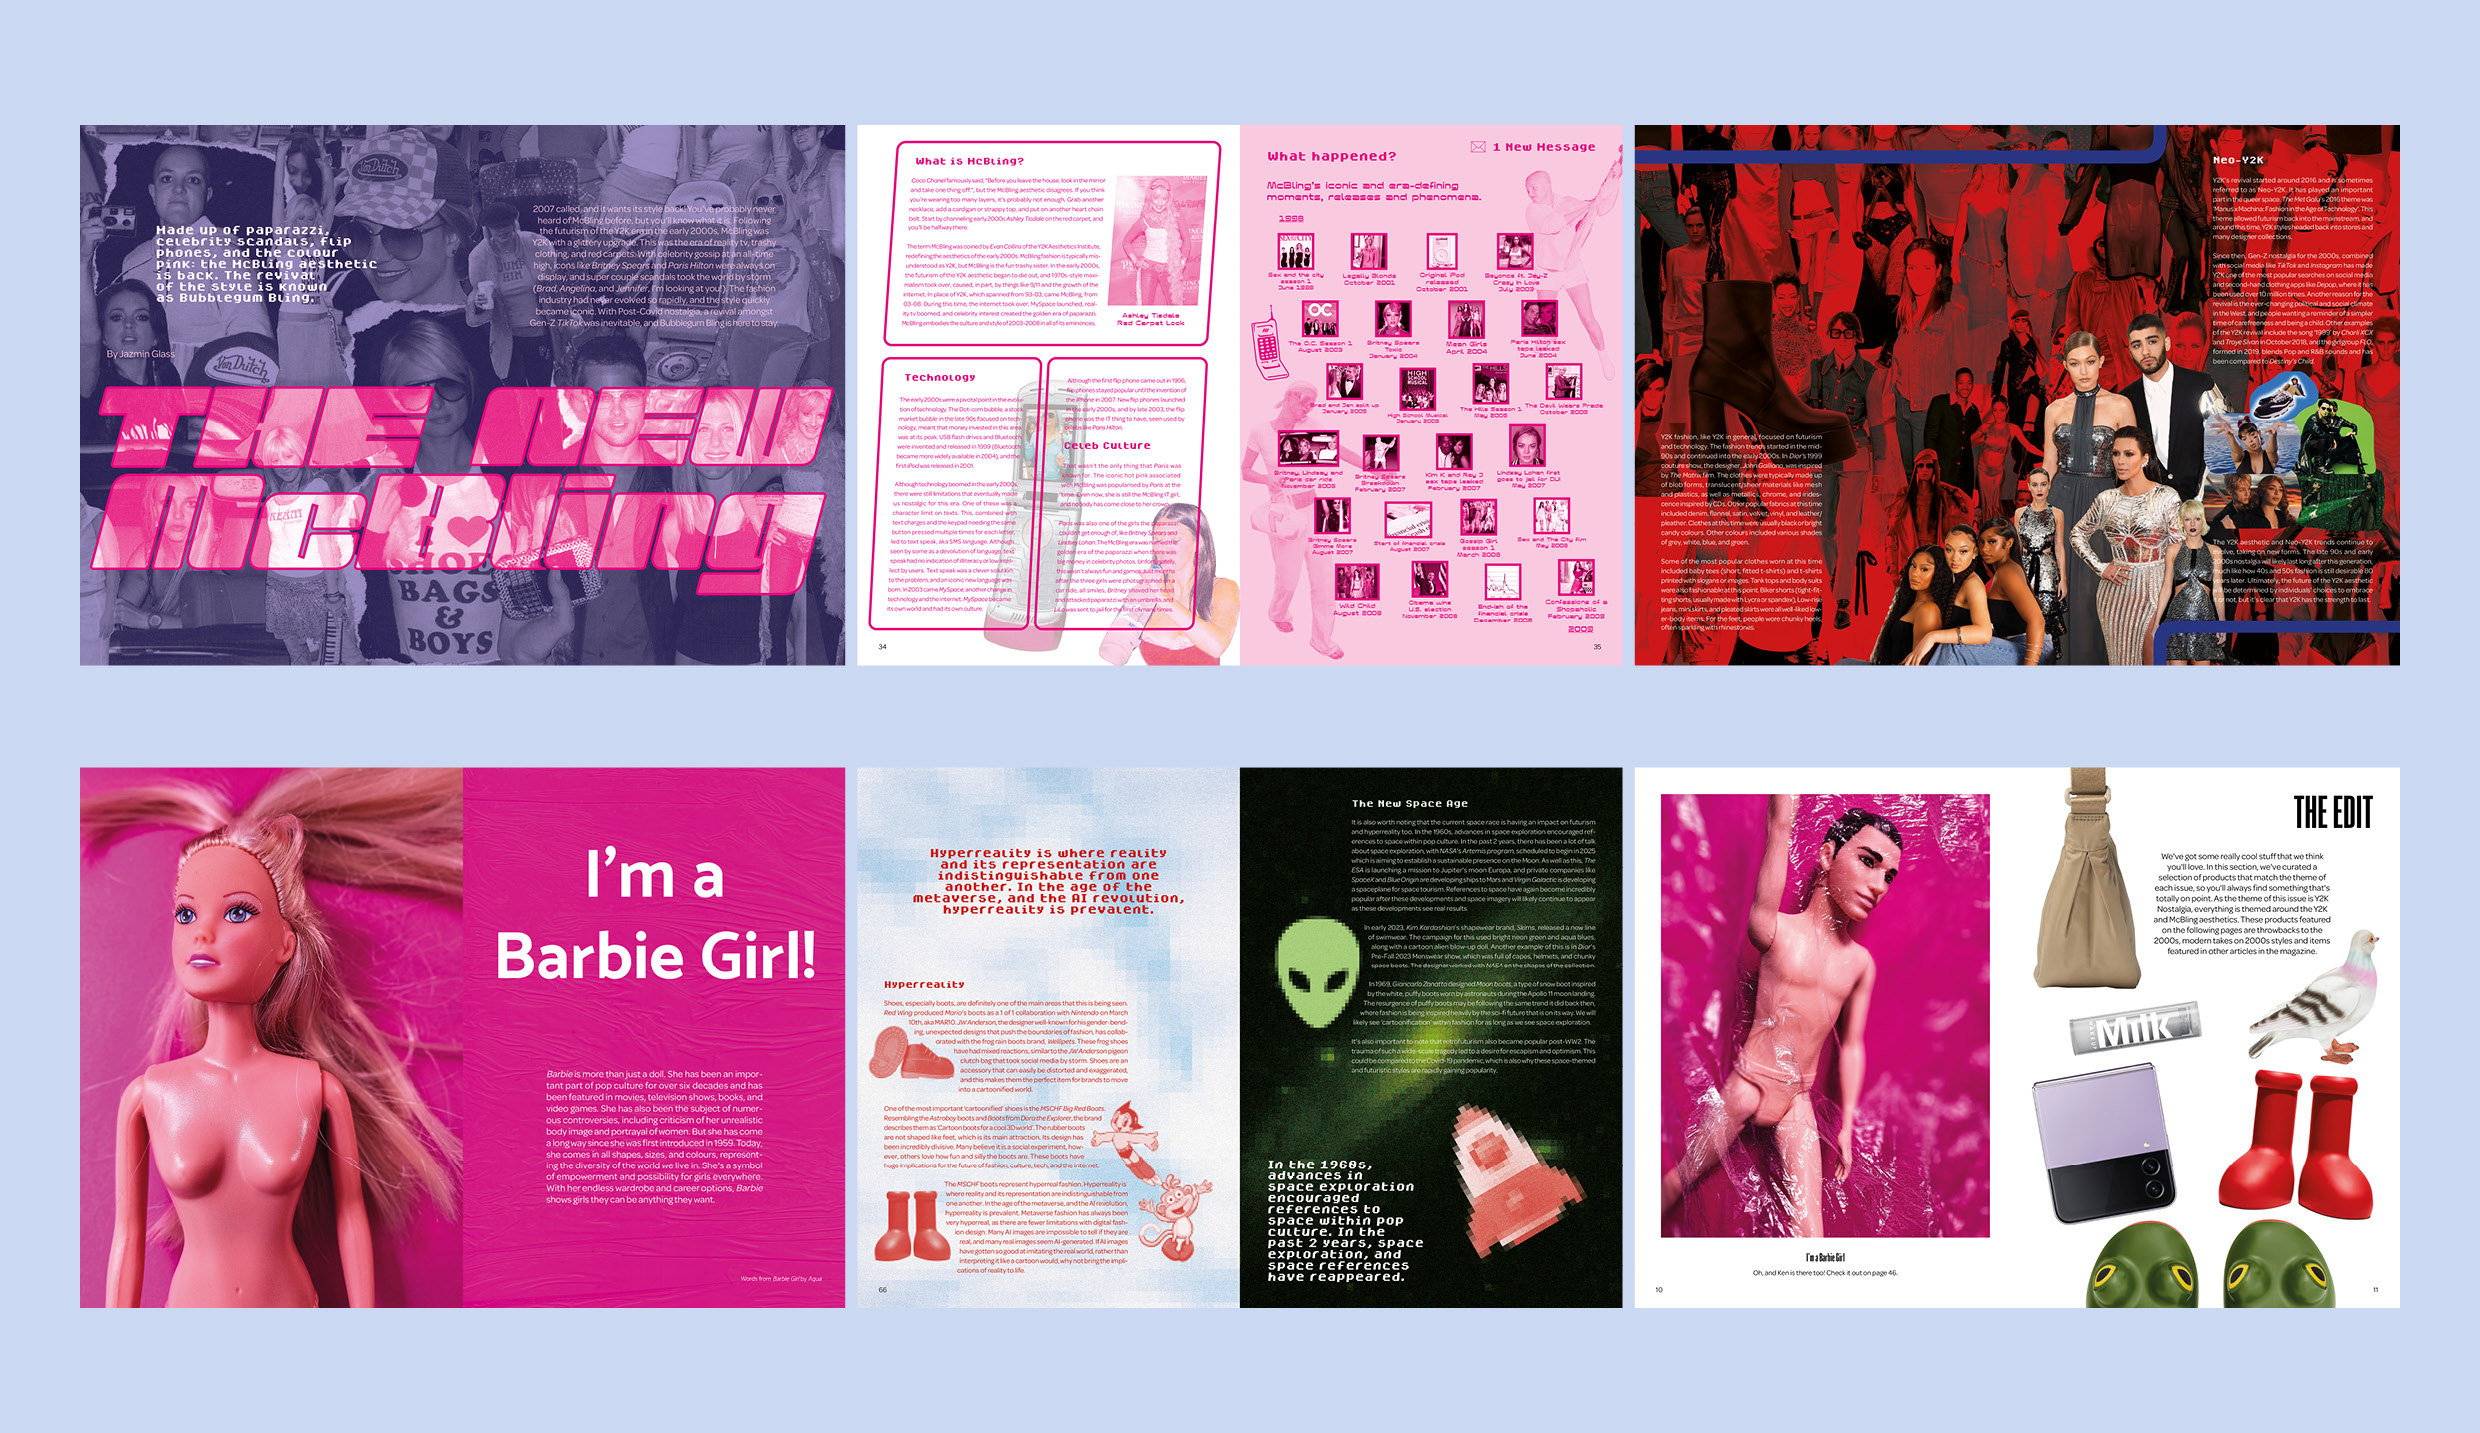 A fashion magazine design by Jordan Fayers. There are several images of different spreads within the magazine.